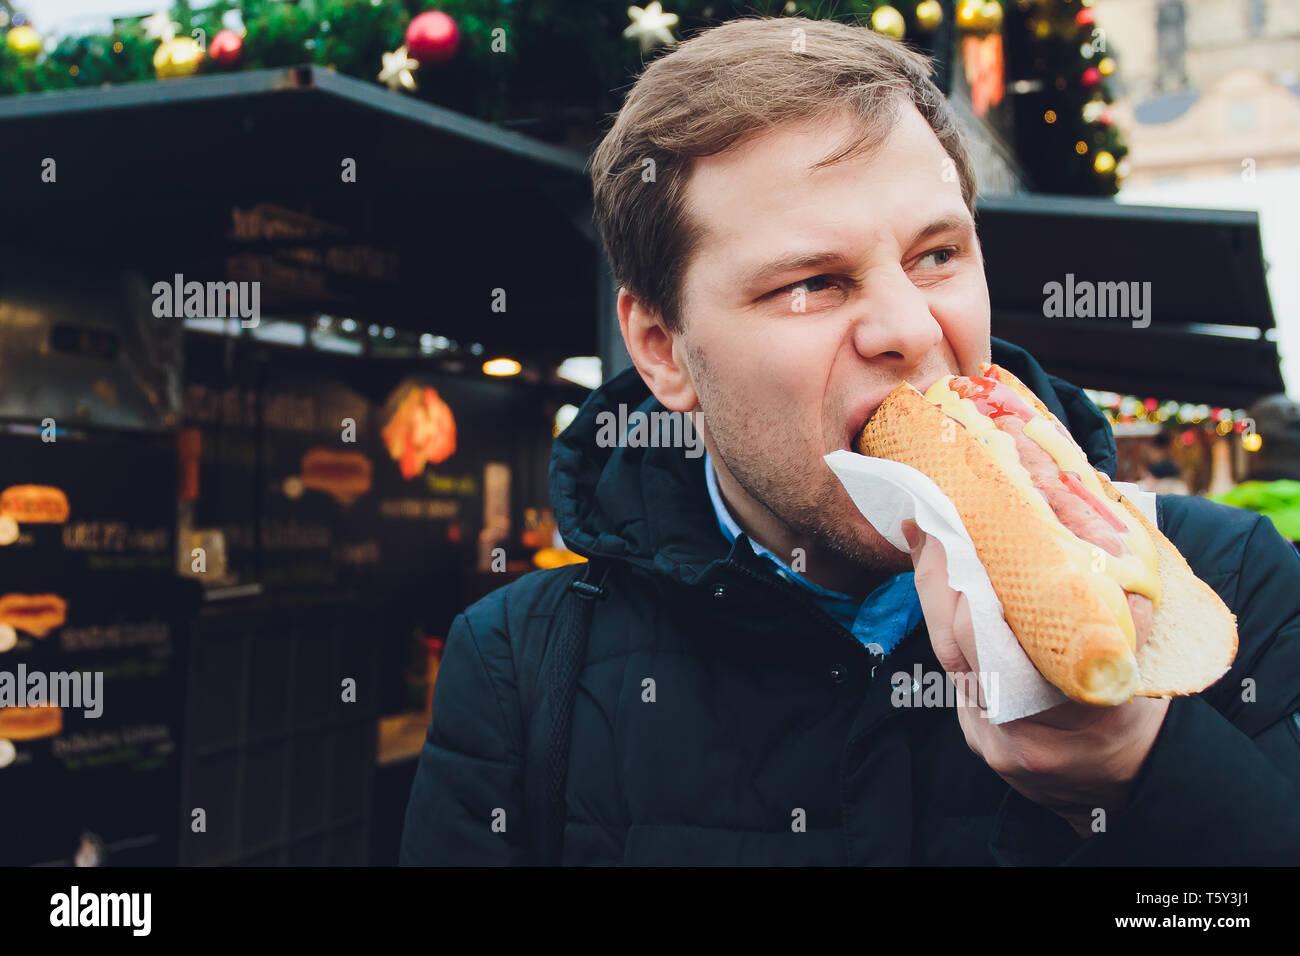 Closeup portrait of hungry man in glasses eating hot dog at outdoors background. Stock Photo